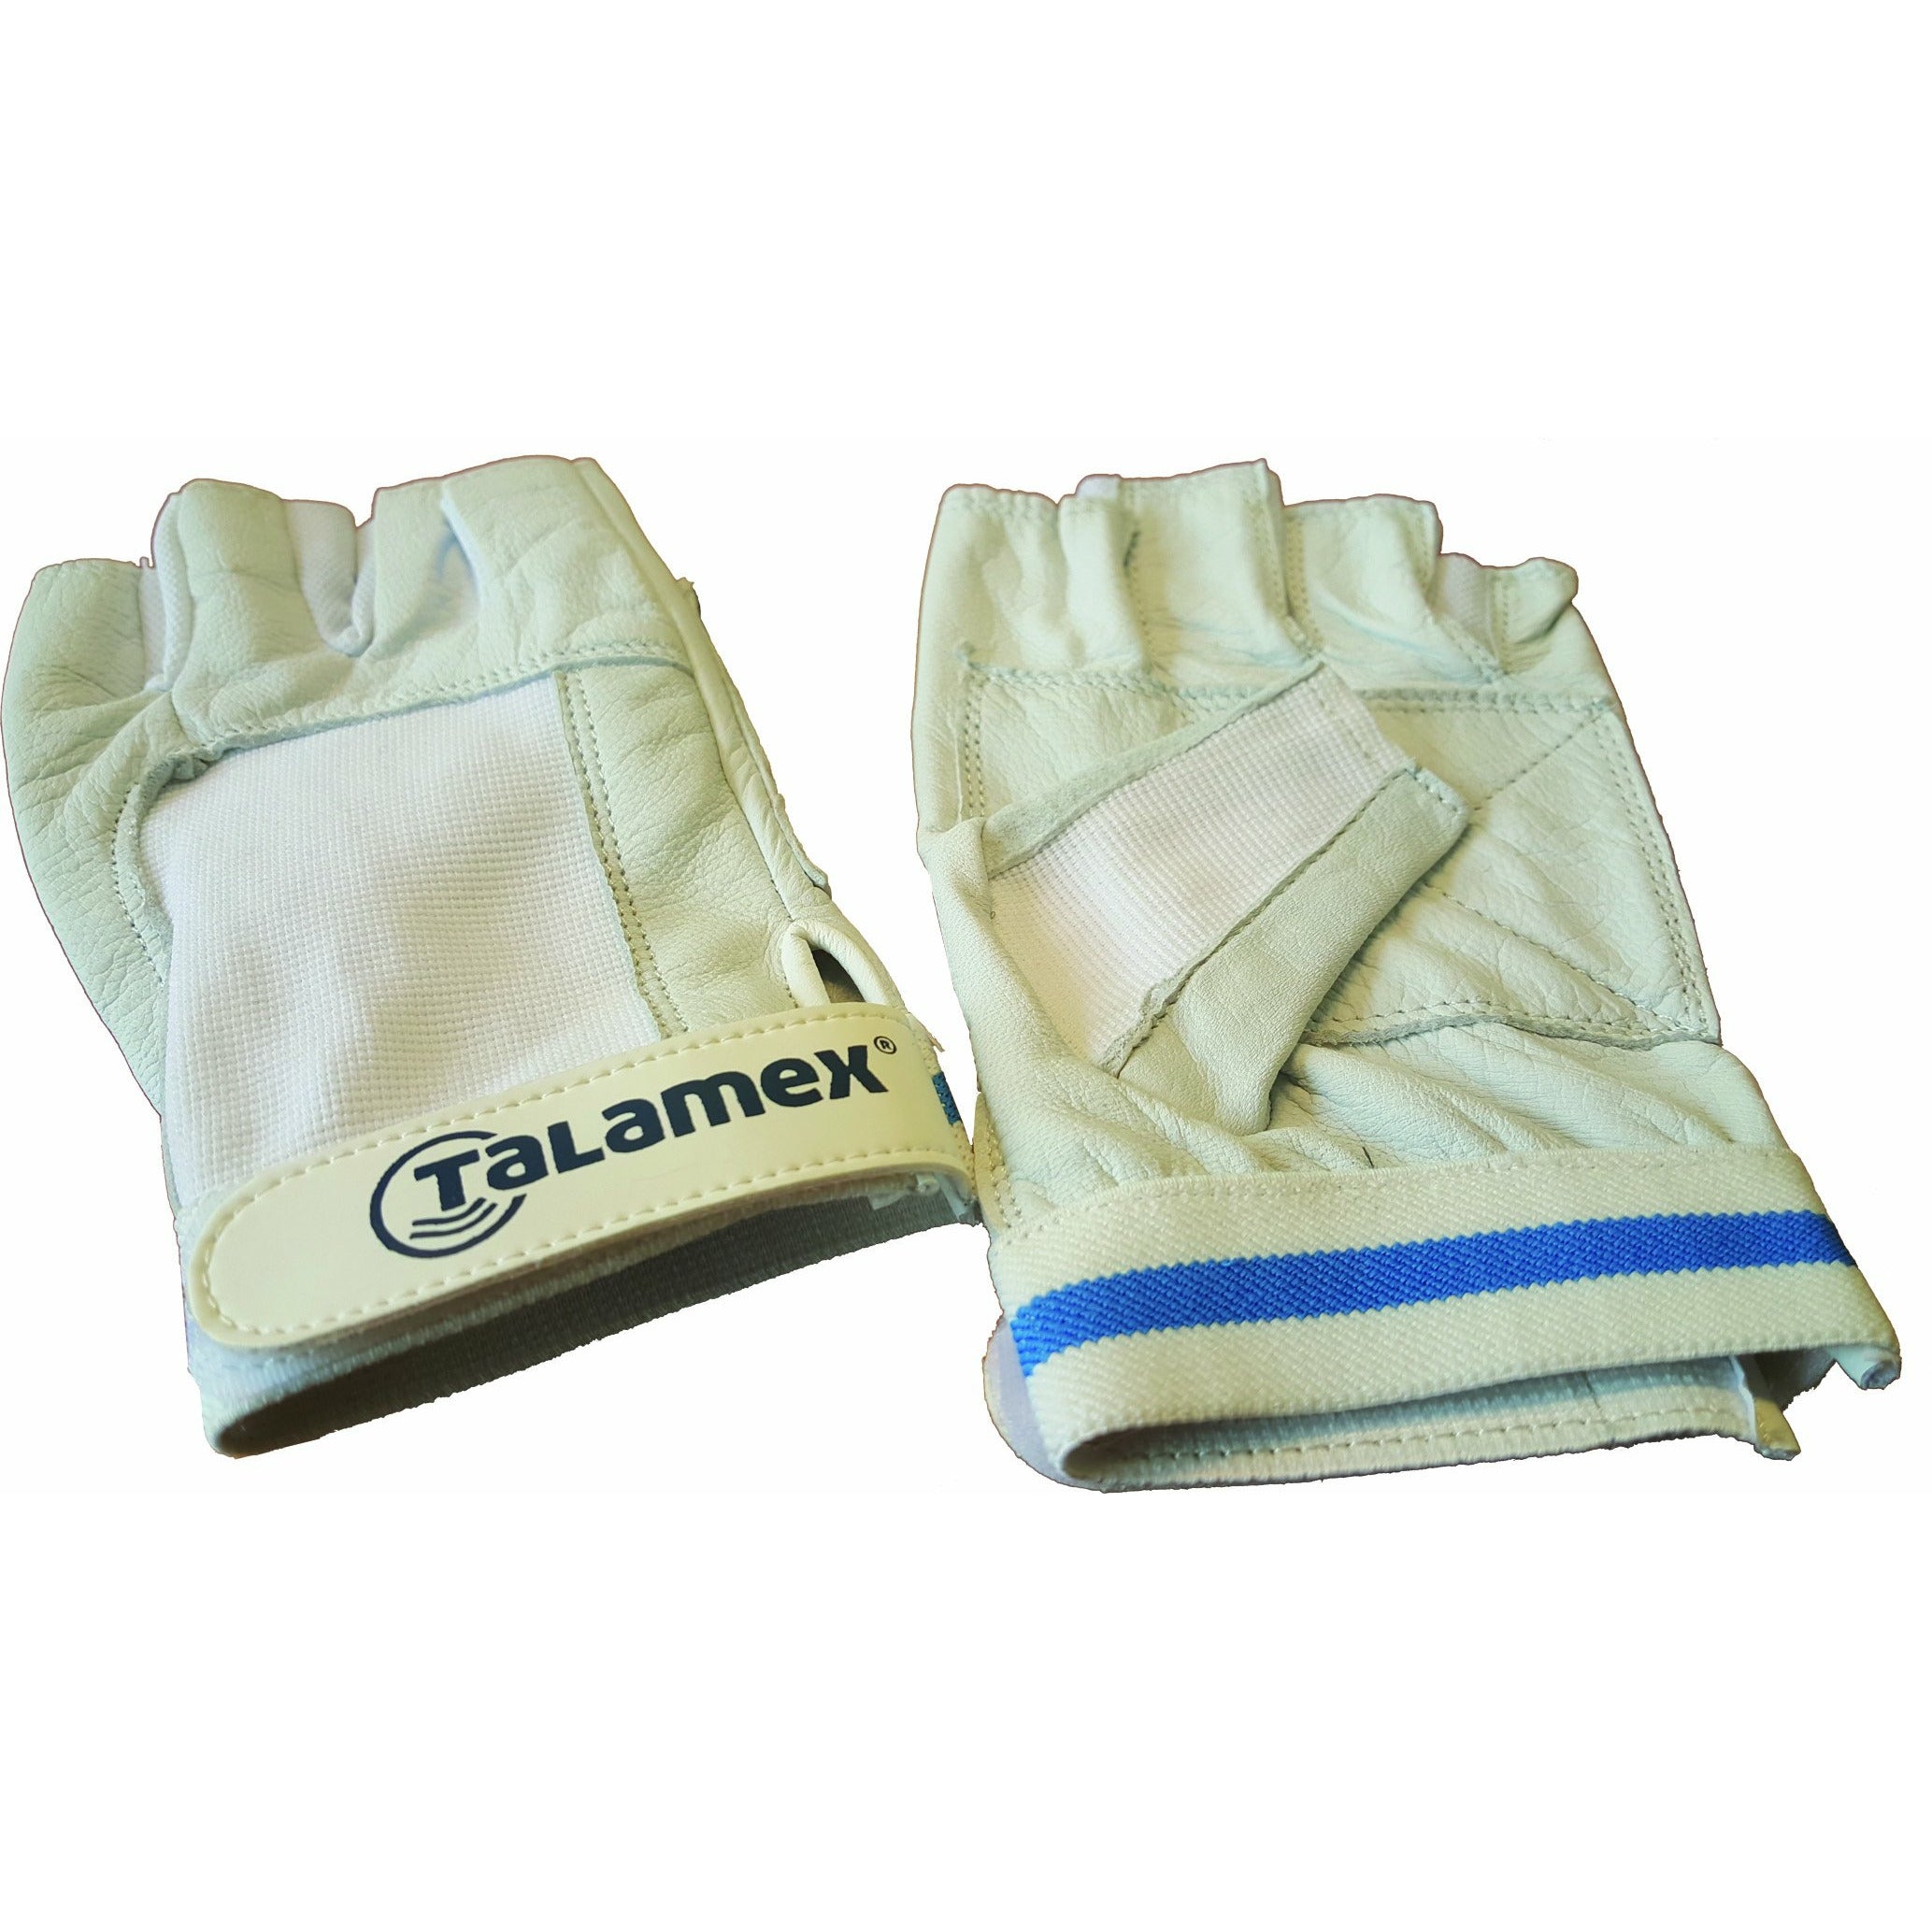 Talamex S'Gloves Open Large 20802003